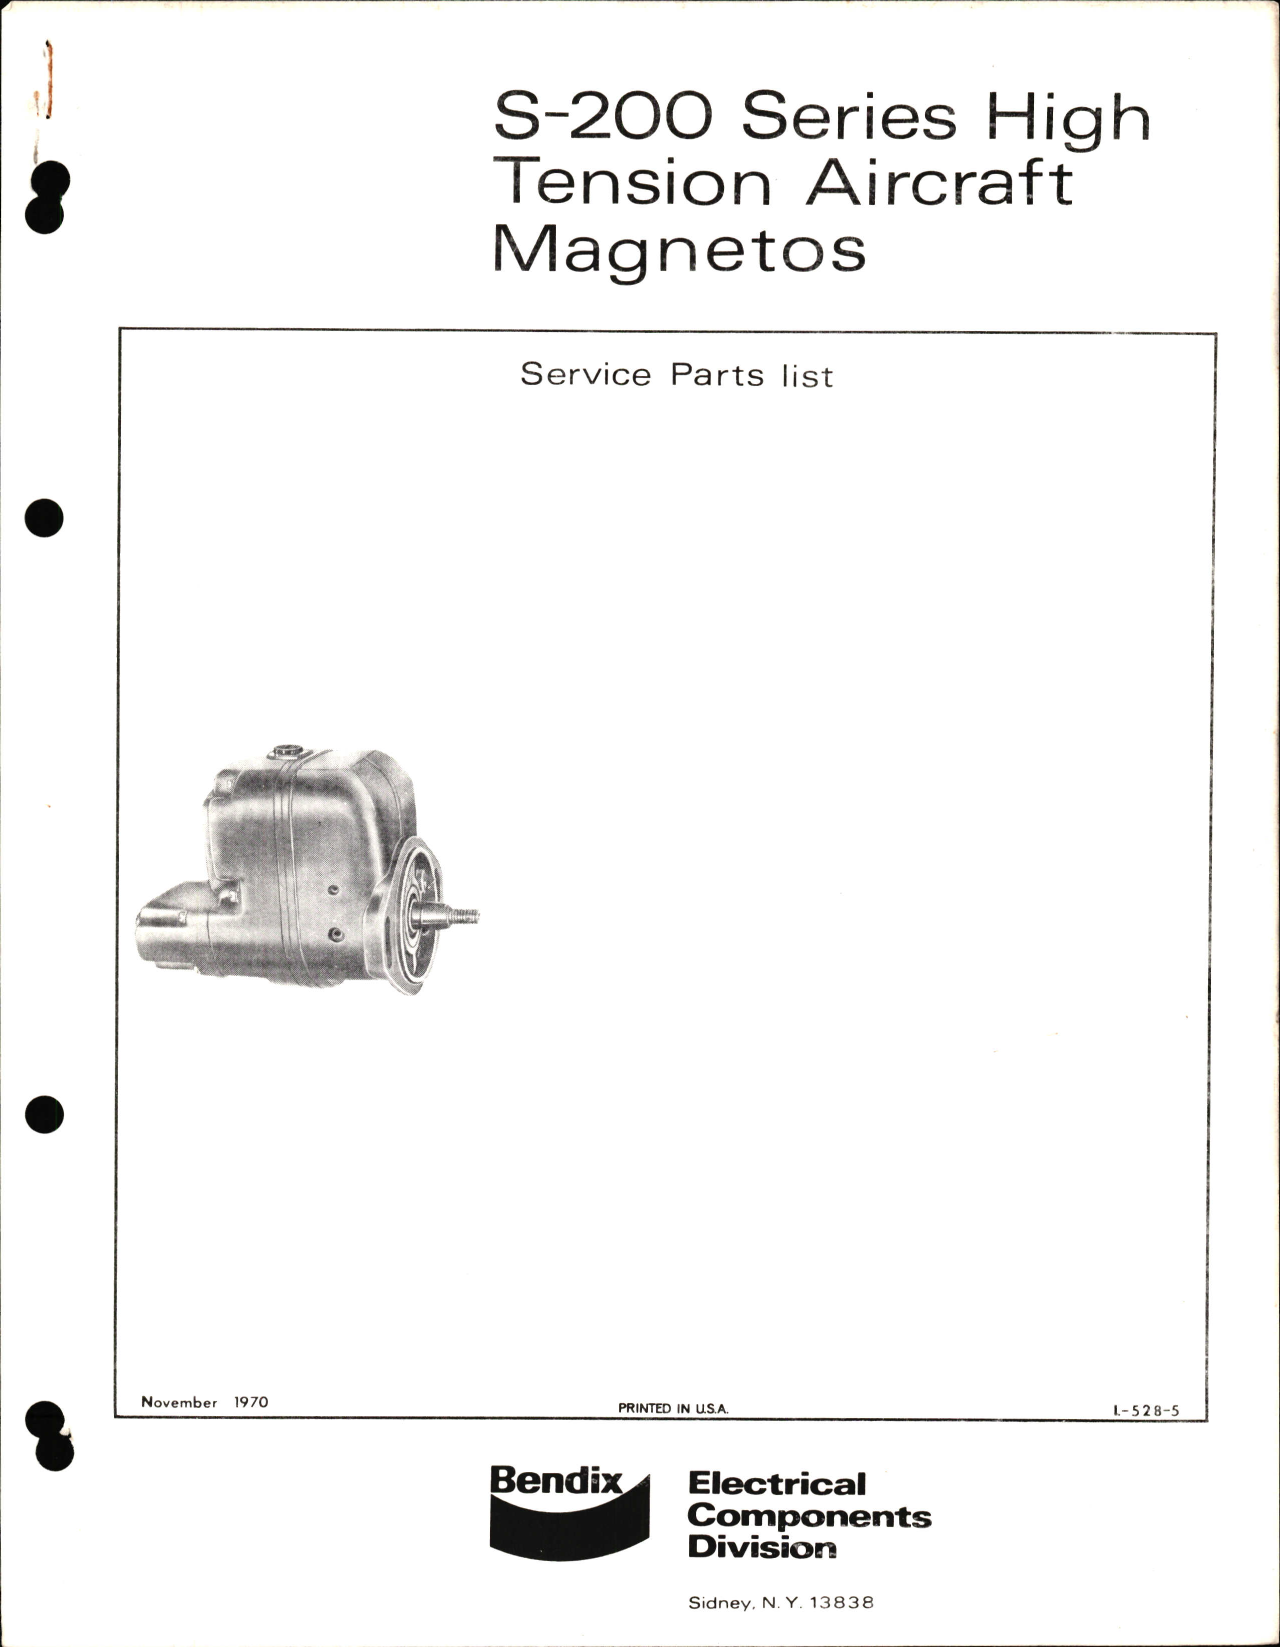 Sample page 1 from AirCorps Library document: Service Parts List for S-200 Series High Tension Aircraft Magnetos